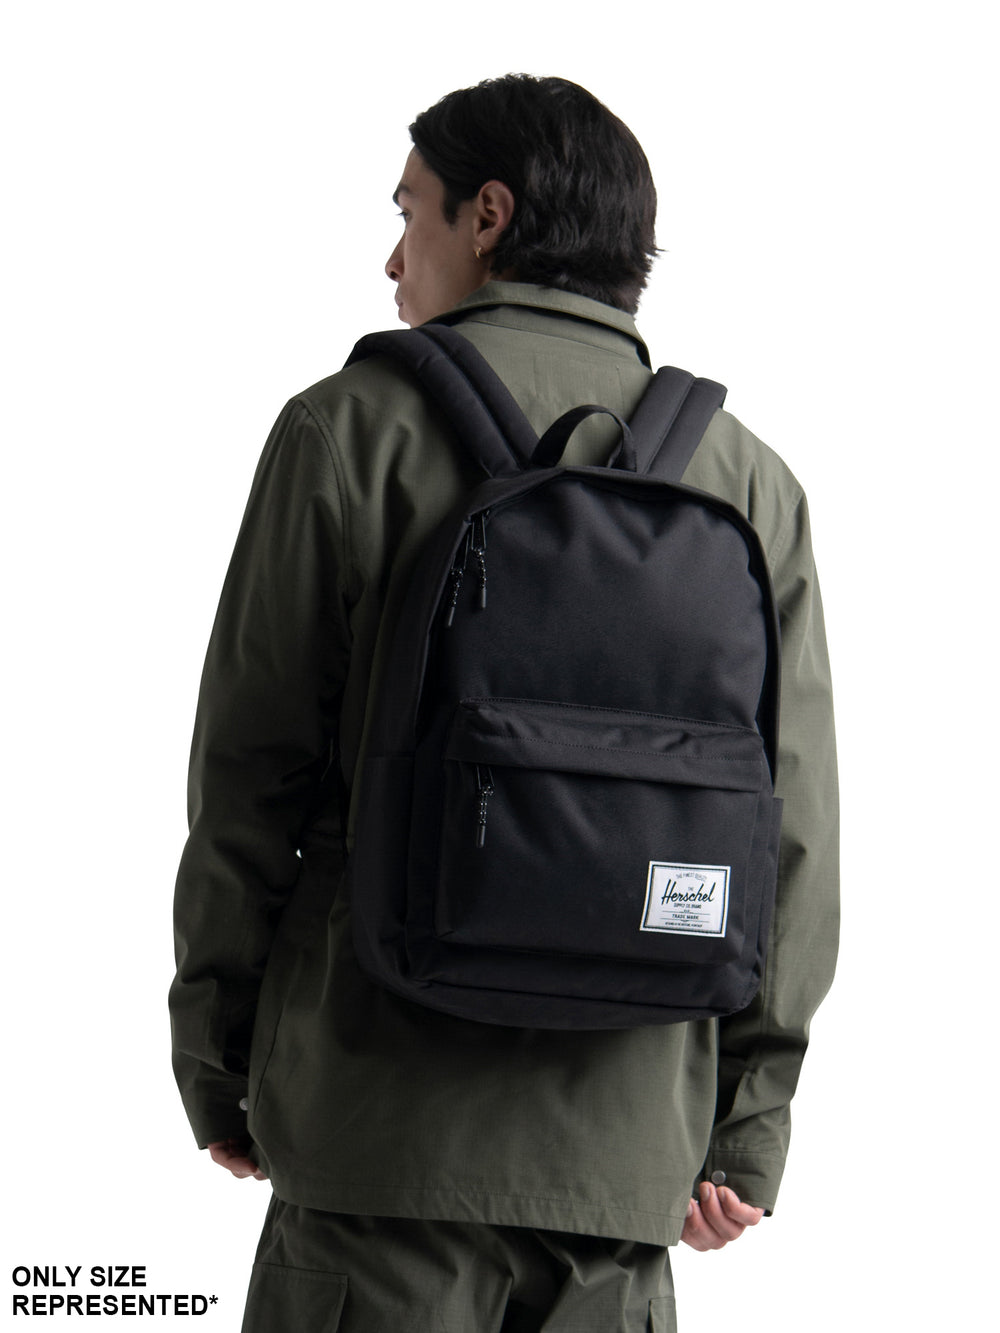 HERSCHEL SUPPLY CO. CLASSIC XL 30L BACKPACK - NIGHT CAMO - CLEARANCE